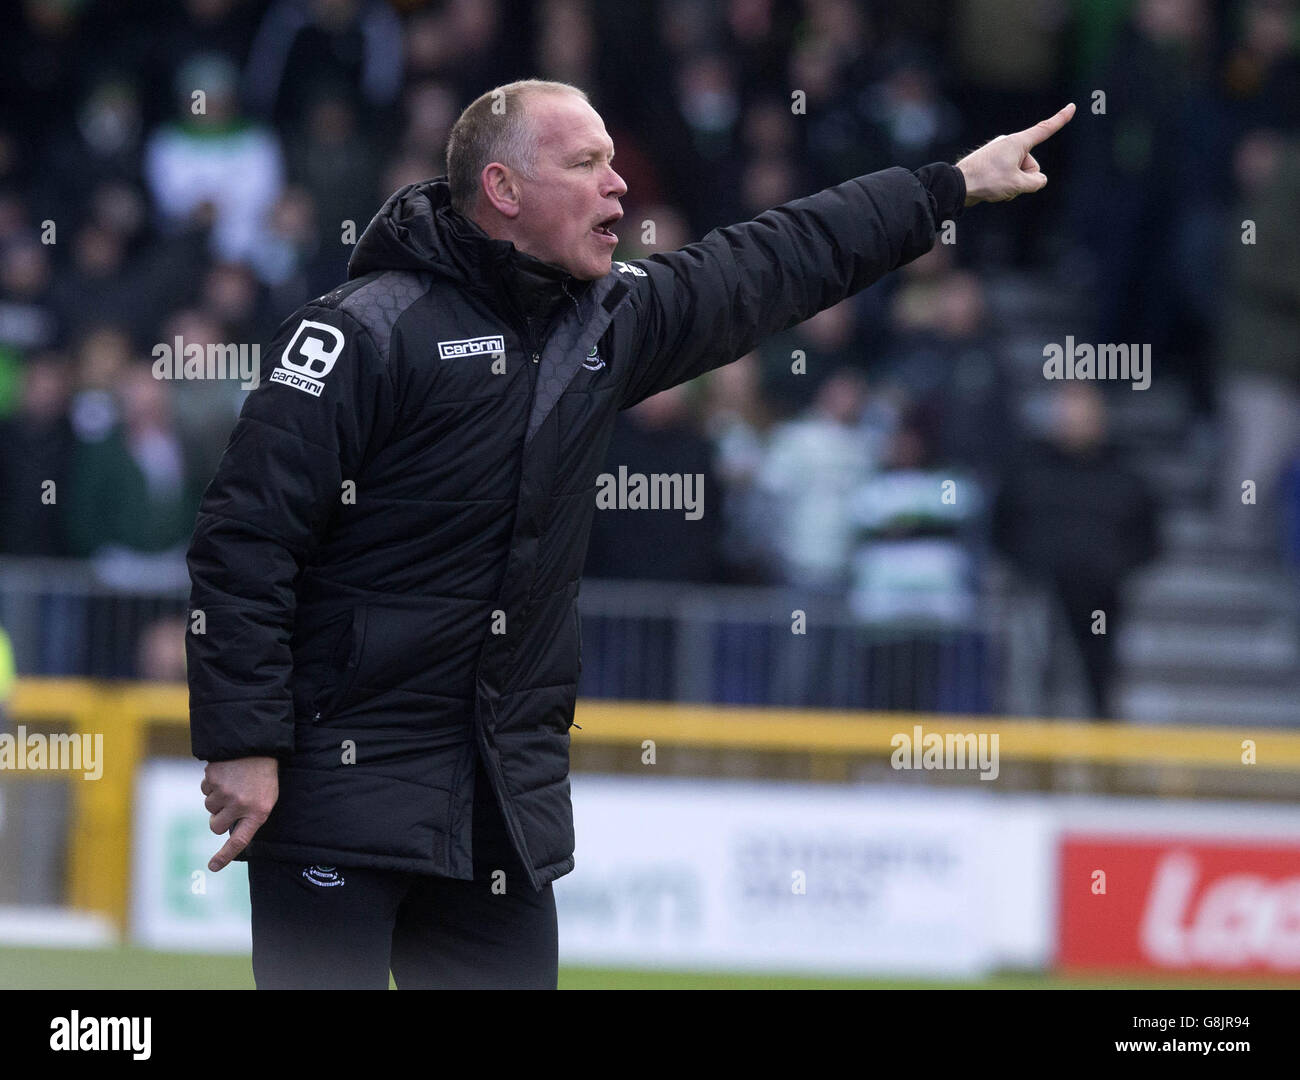 Inverness Caledonian Thistle manager John Hughes during the Ladbrokes Scottish Premiership at Caledonian Stadium, Inverness. PRESS ASSOCIATION Photo. Picture date: Sunday November 29, 2015. See PA story SOCCER Inverness. Photo credit should read: Jeff Holmes/PA Wire. EDITORIAL USE ONLY. Stock Photo